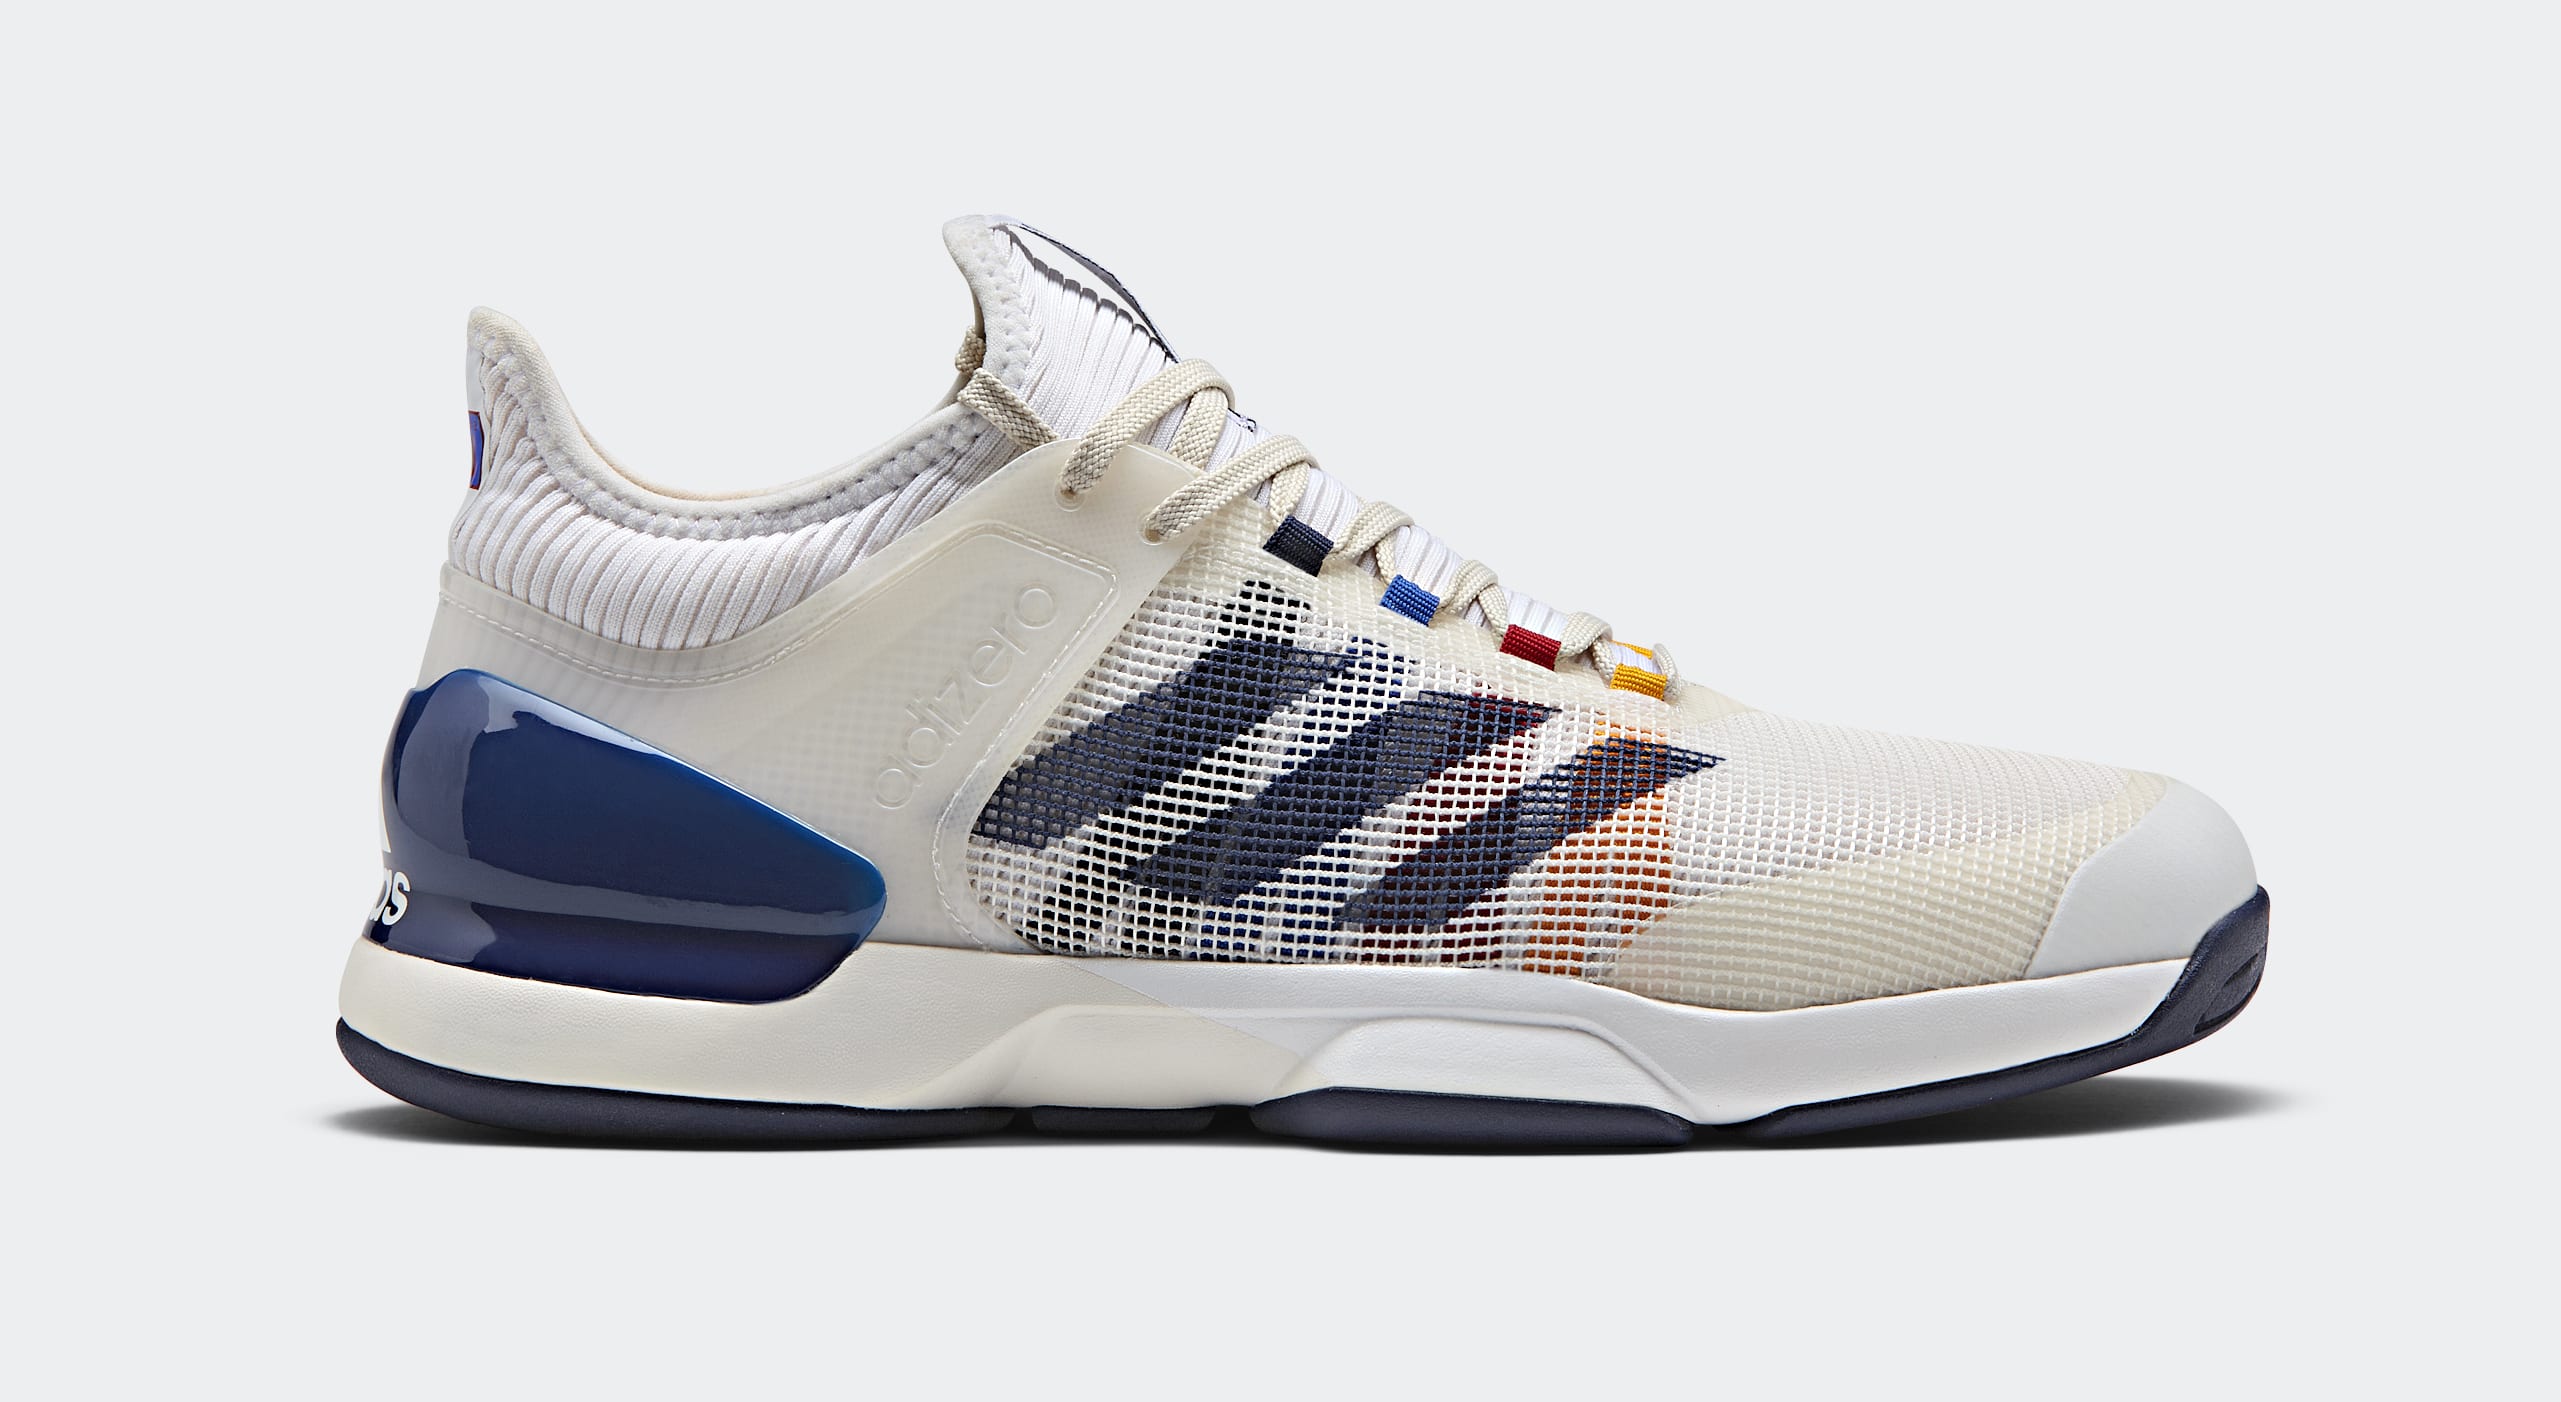 Adidas Tennis by Pharrell Ubersonic 2.0 (Lateral)